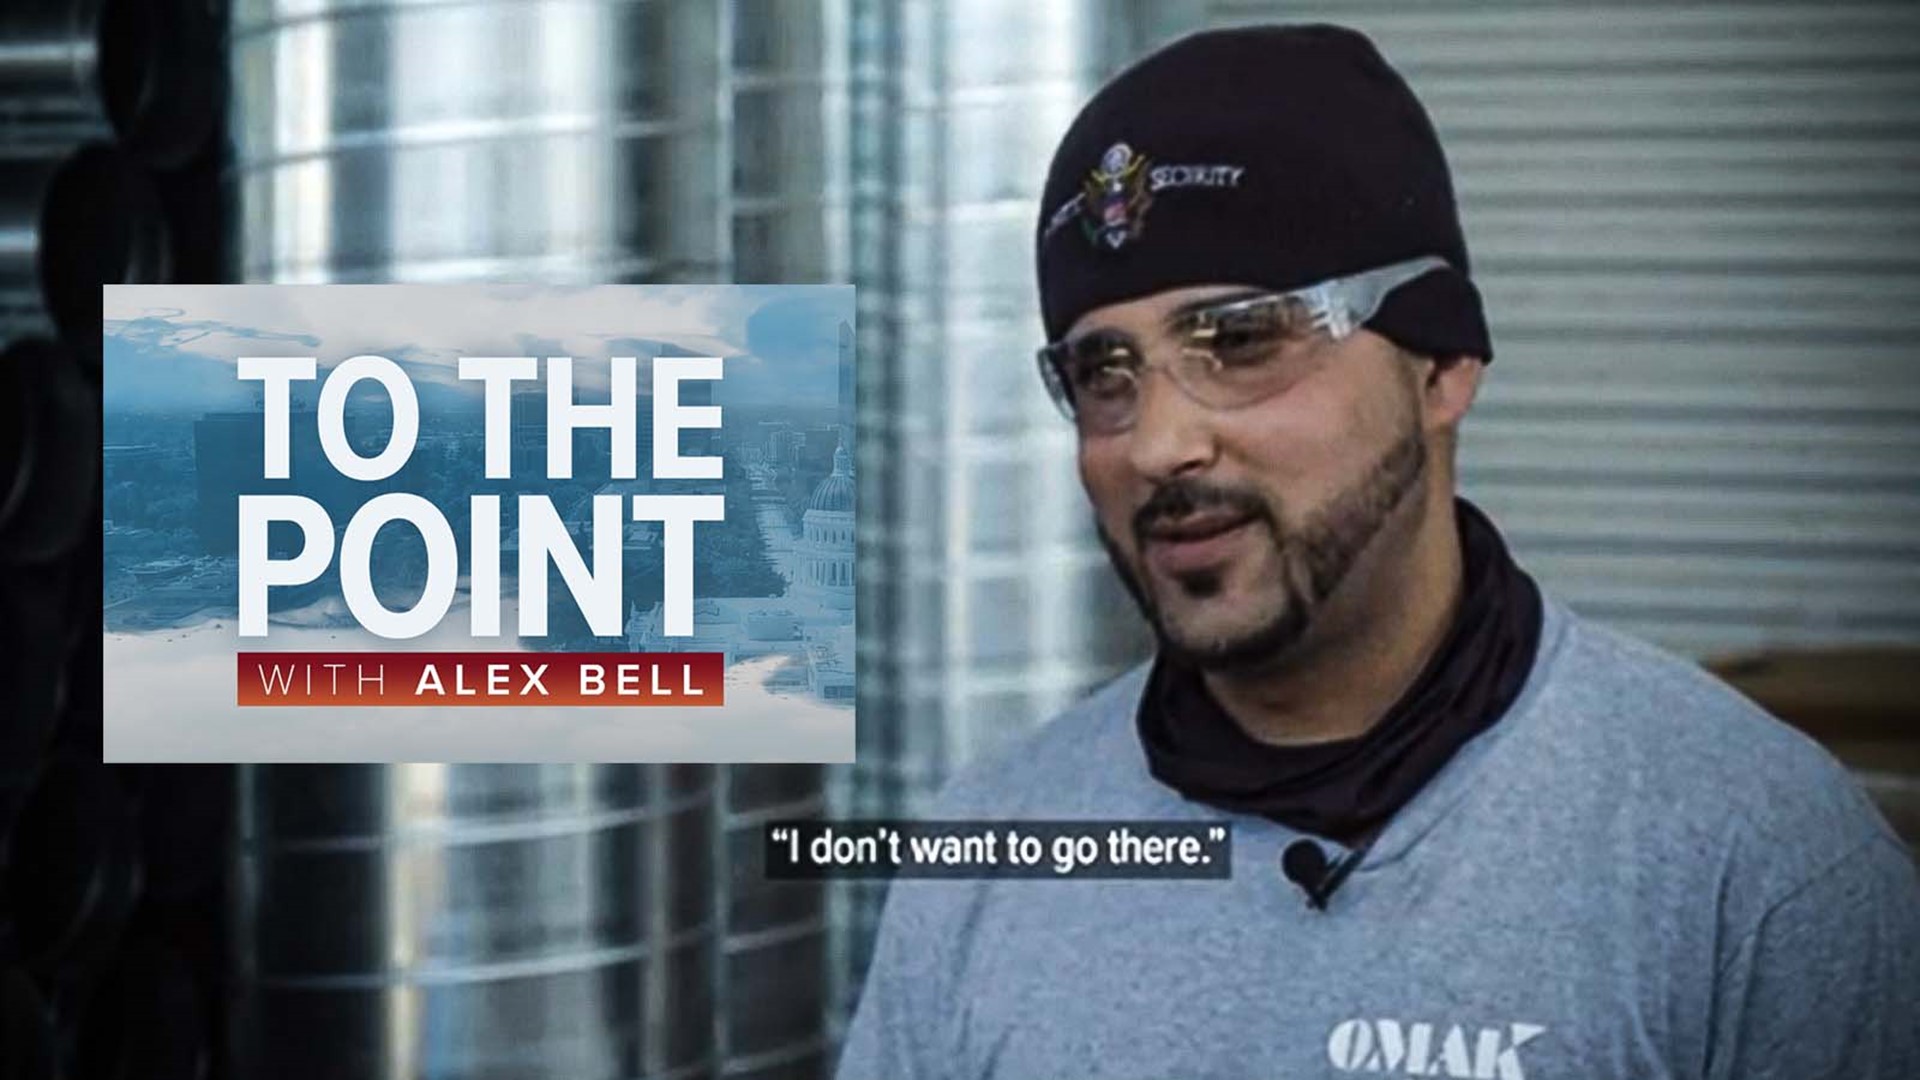 In tonight's To The Point with Alex Bell, she takes a look at how the thousands of refugees resettling in Sacramento are getting help from a local organization.